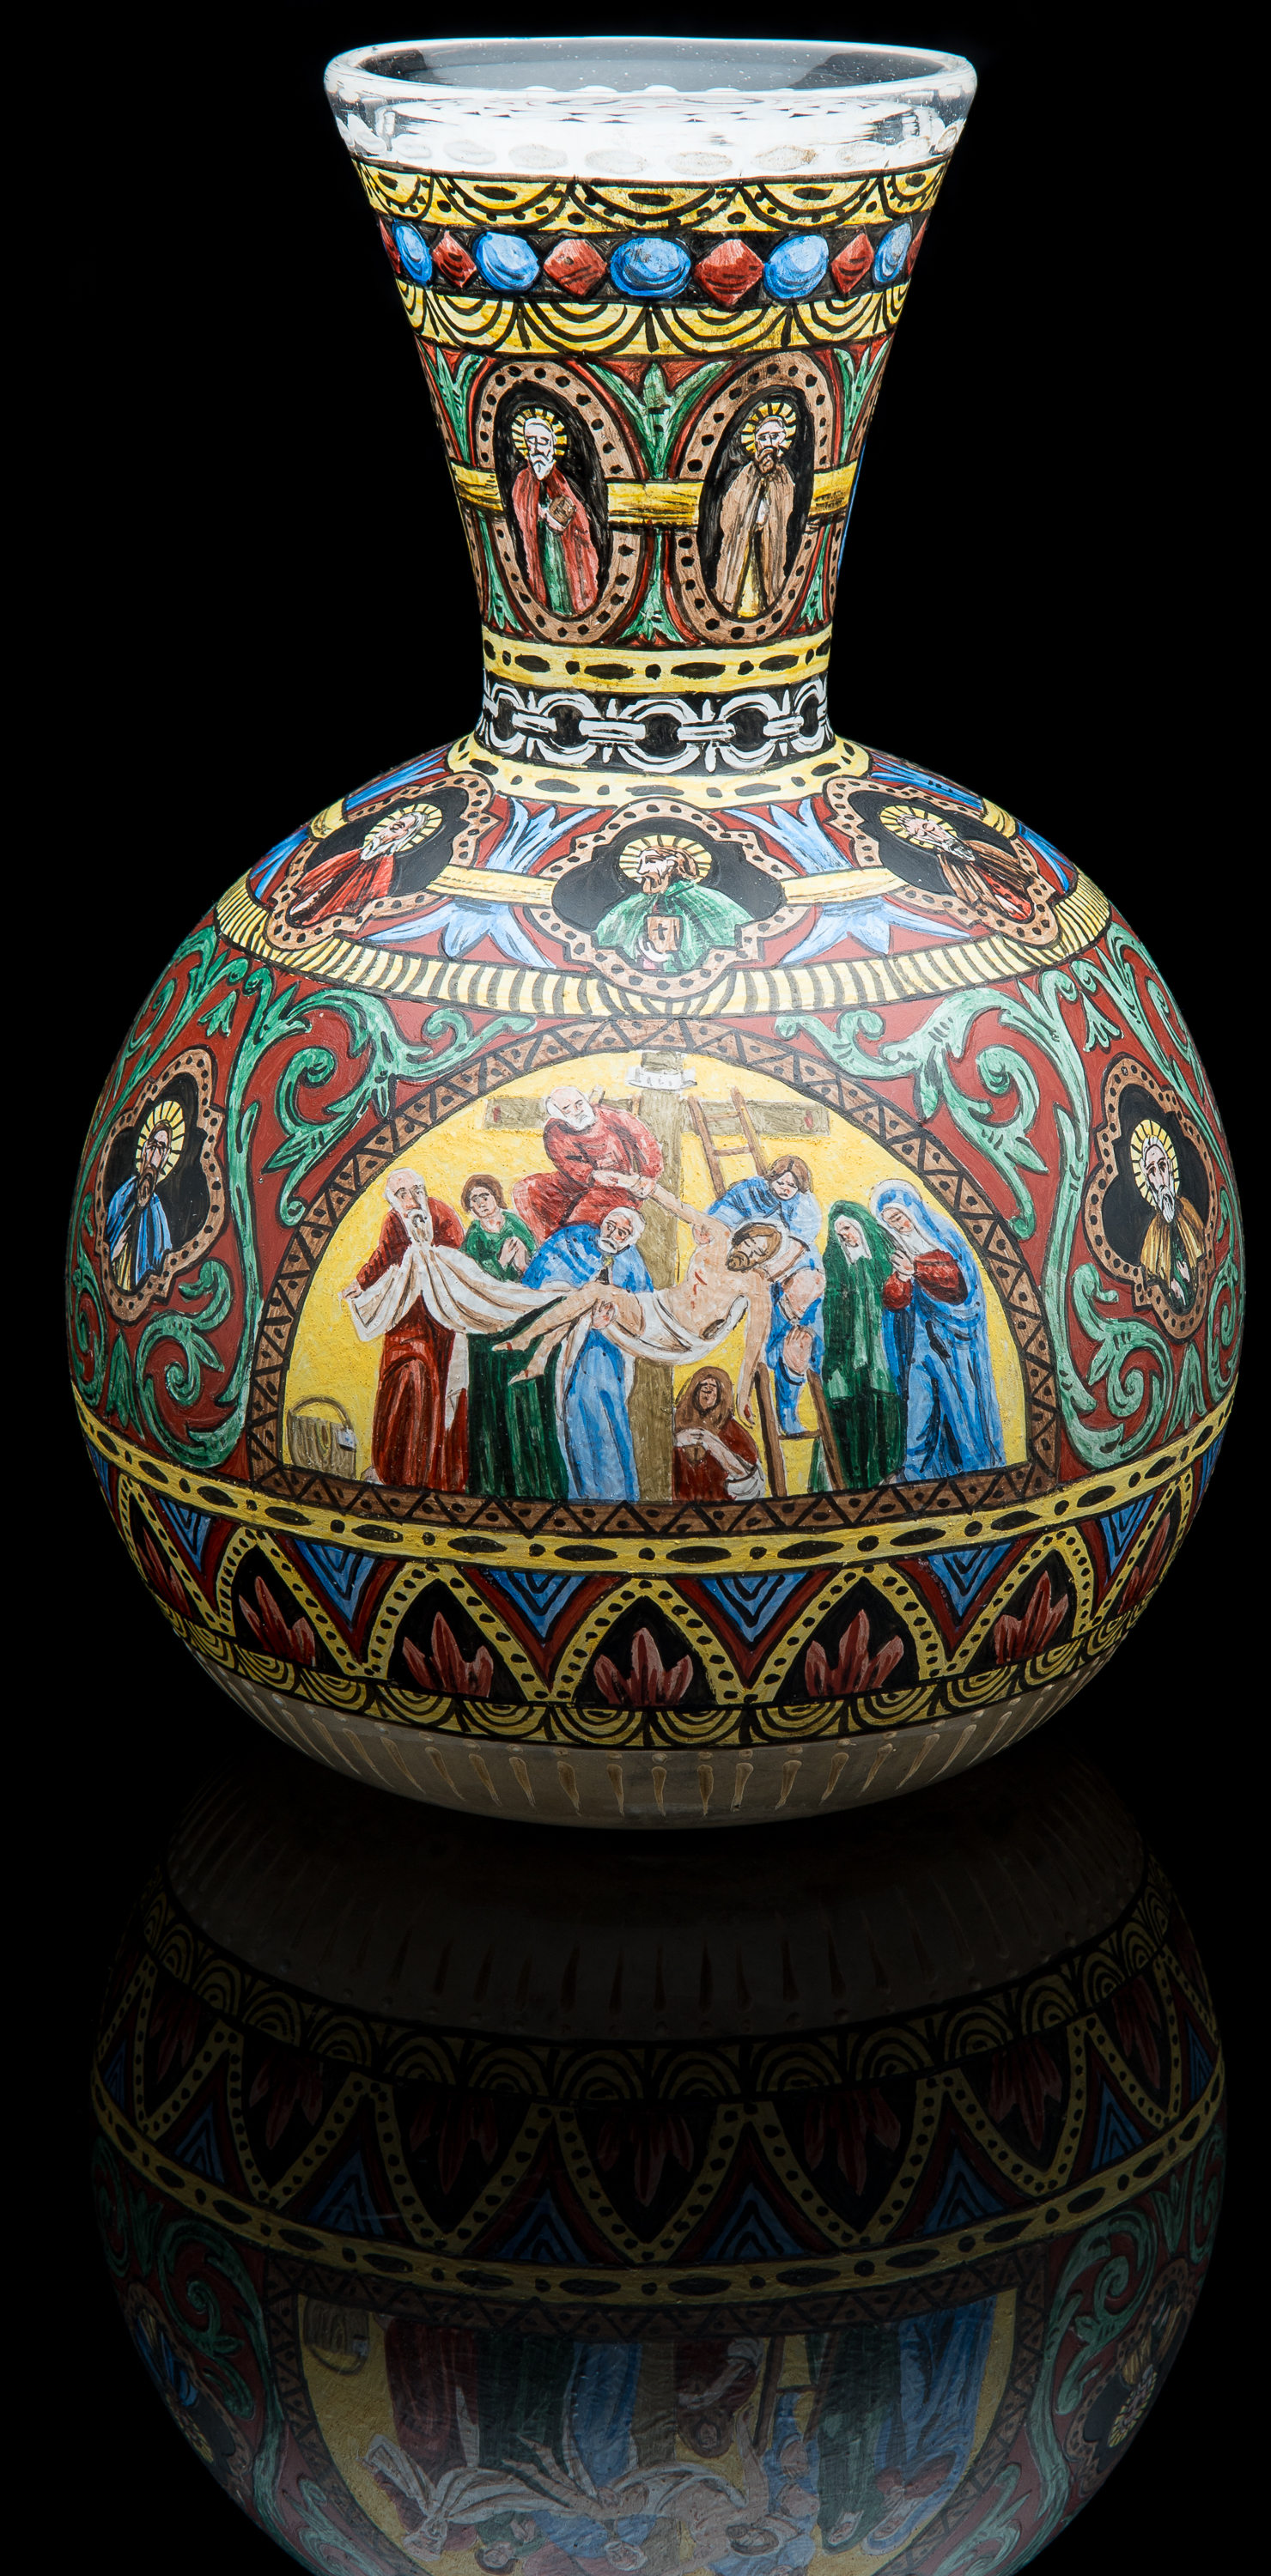  Unknown,  Colorless Vase Painted with Scenes from the Life of Christ  (circa 1885, glass, 11.25 inches), VV.1013 